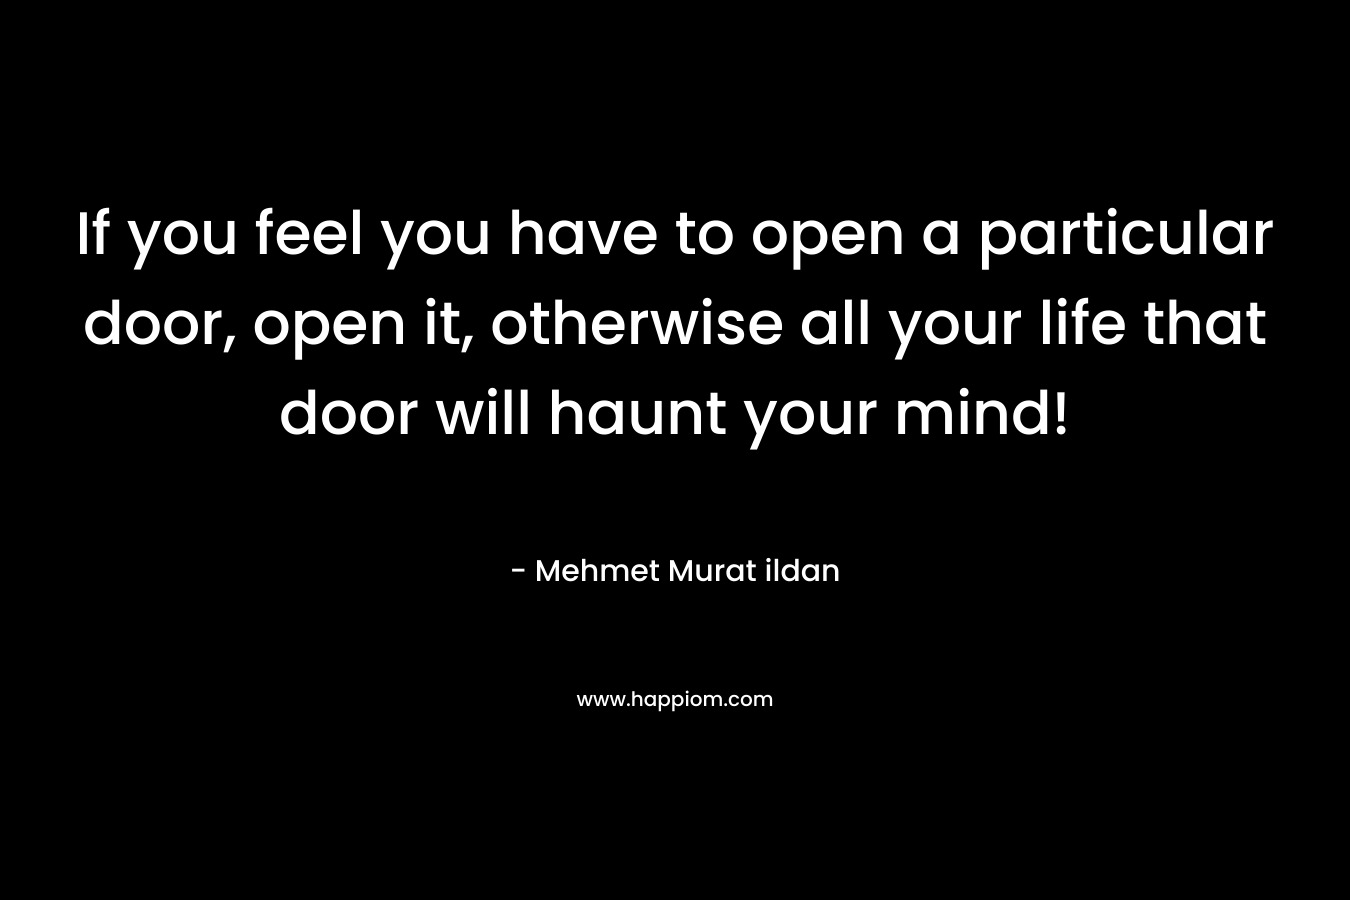 If you feel you have to open a particular door, open it, otherwise all your life that door will haunt your mind!